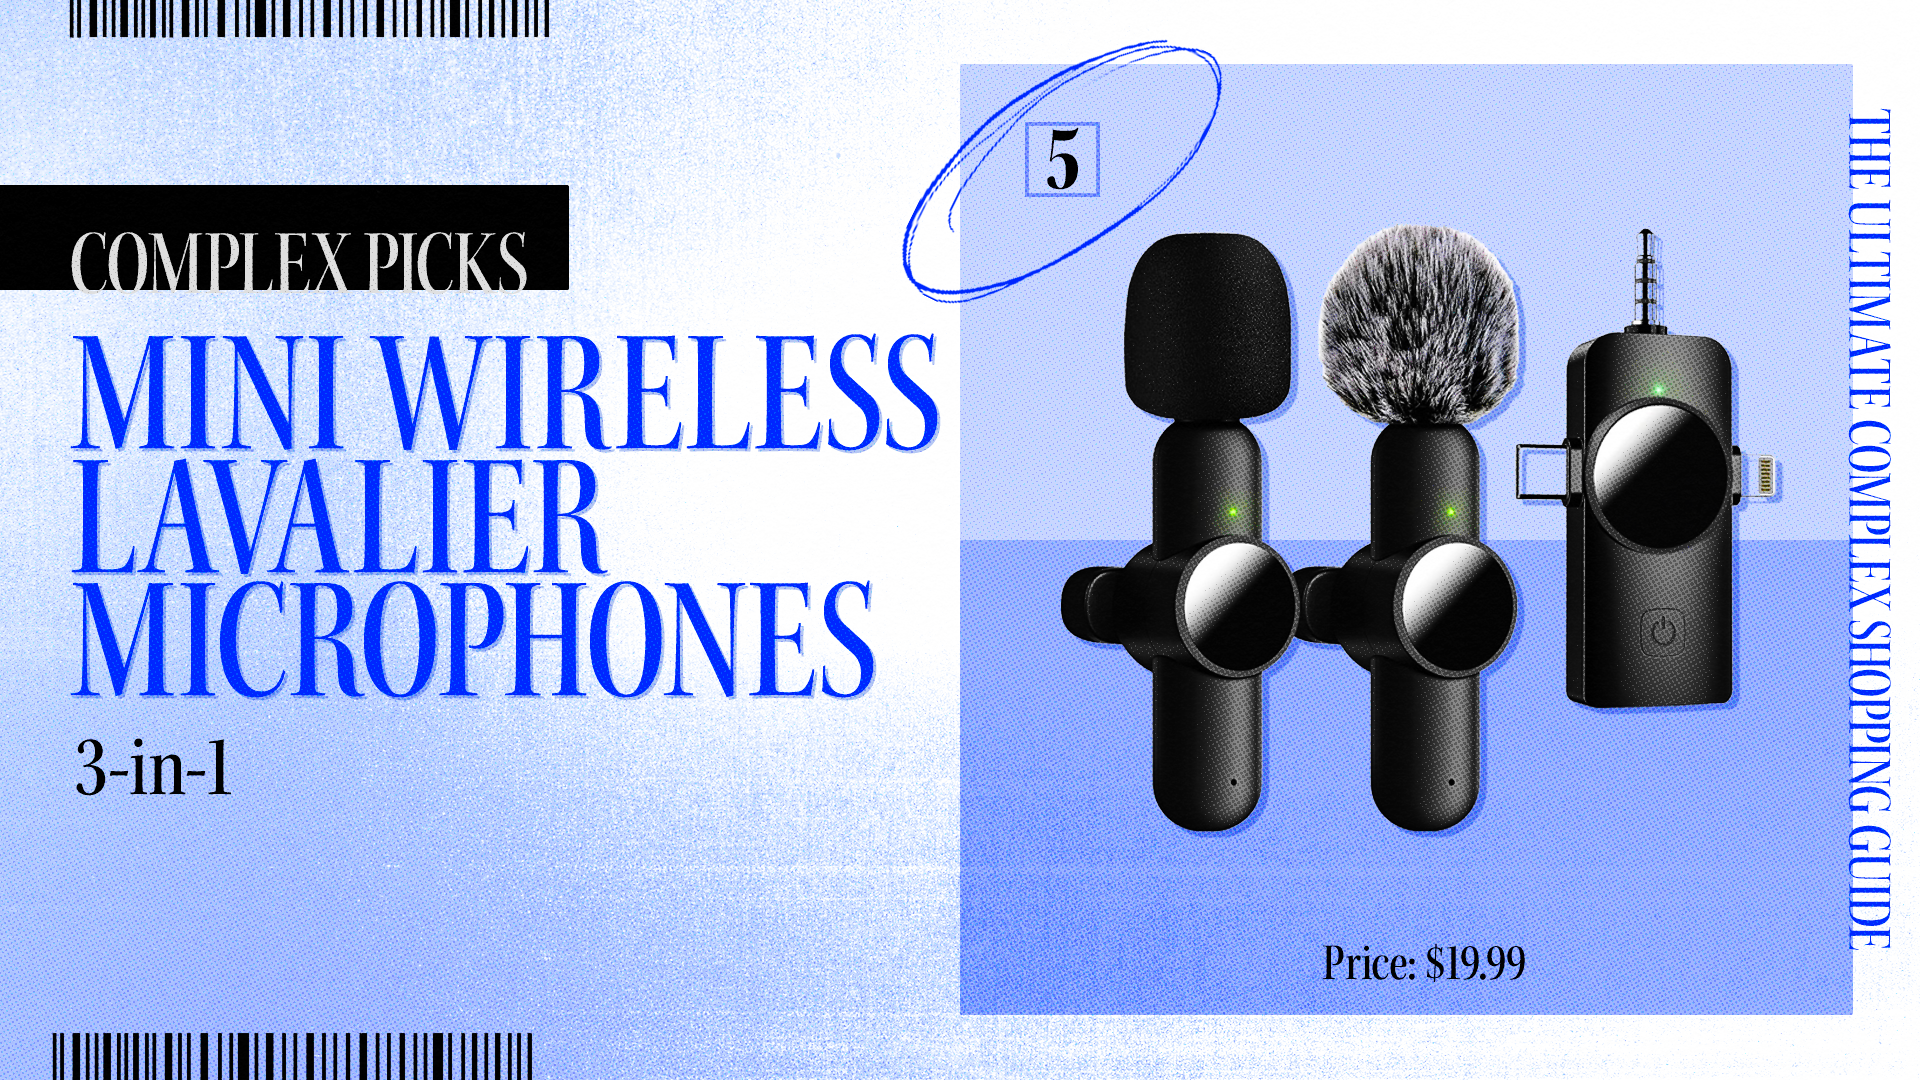 Ad for a 3-in-1 mini wireless lavalier microphone set, priced at $19.99. It is featured as a top pick in &quot;The Ultimate Complex Shopping Guide&quot;